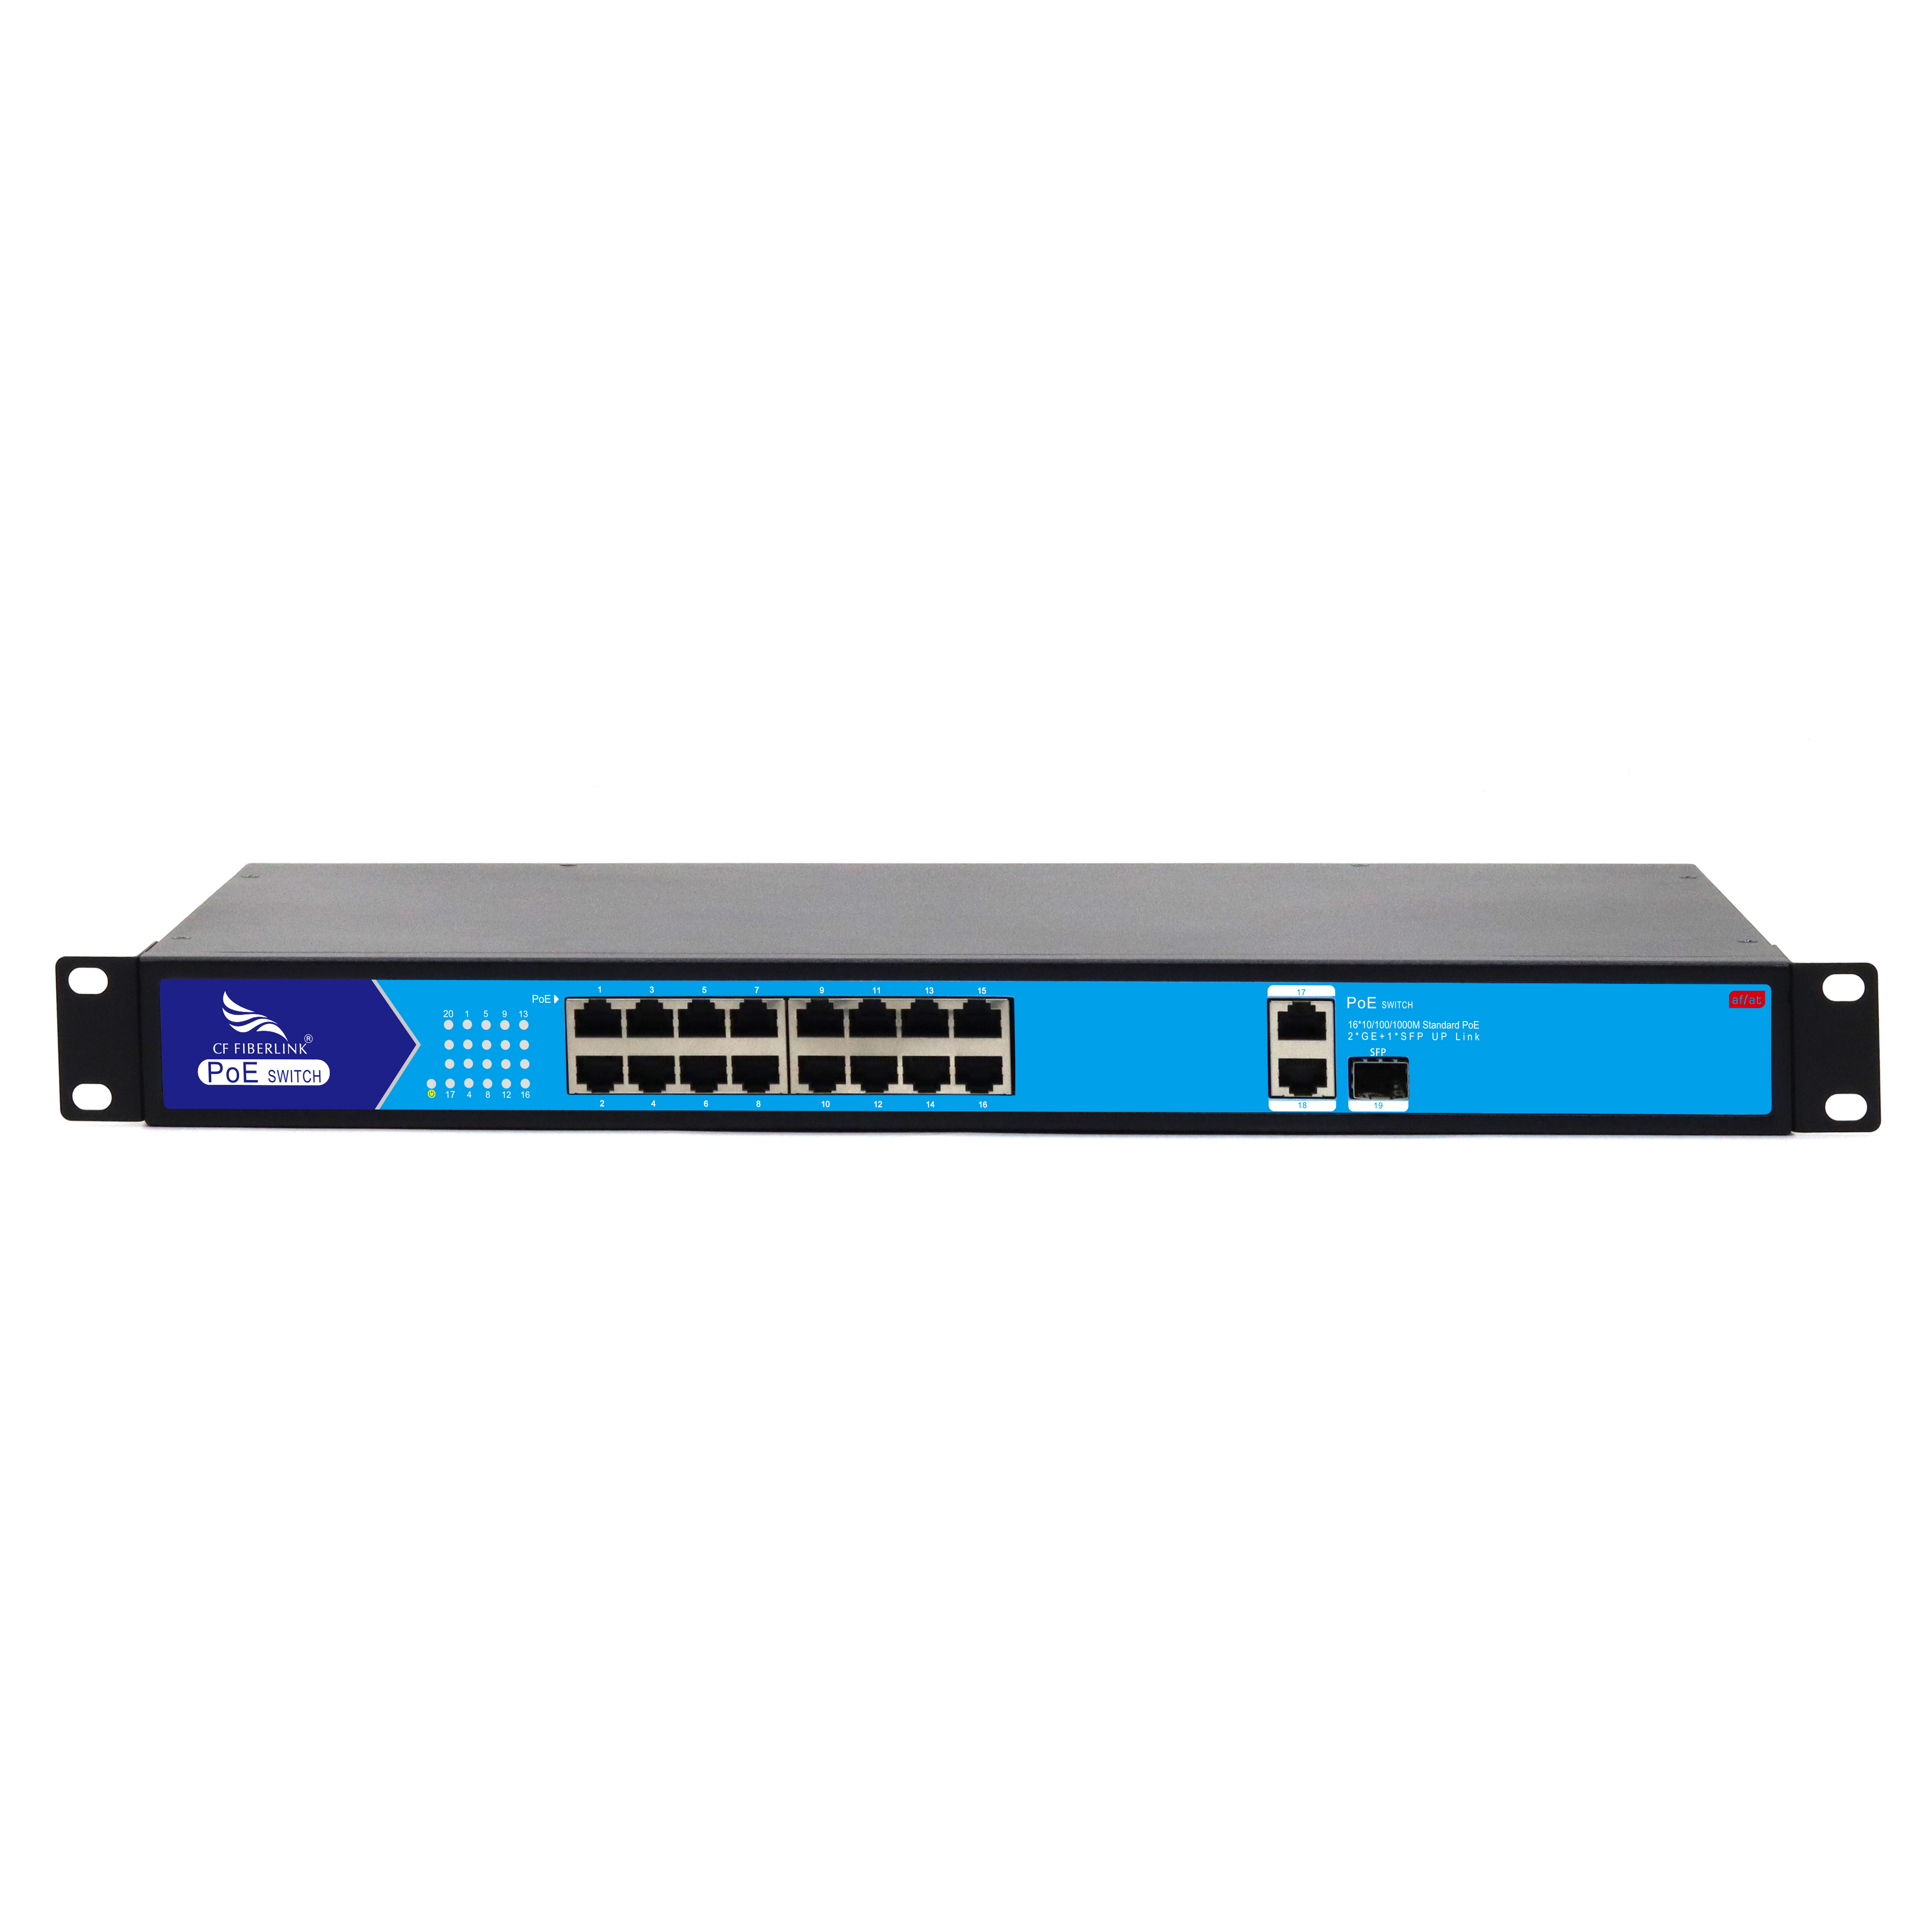 19-port 10/100/1000M Ethernet Switch Featured Image